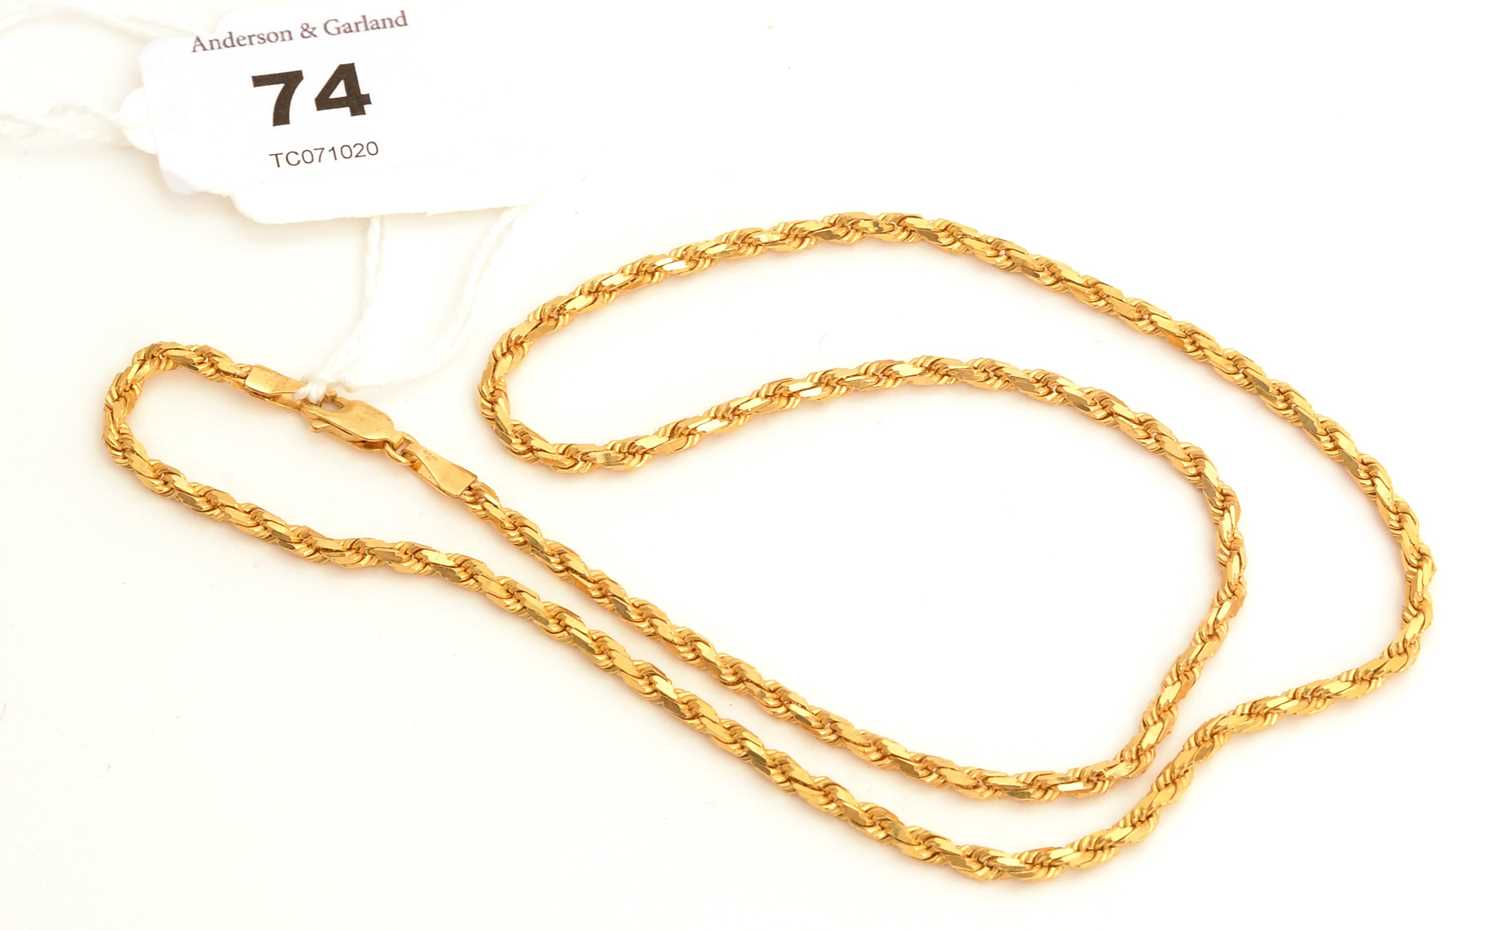 Lot 74 - 9ct yellow gold necklace